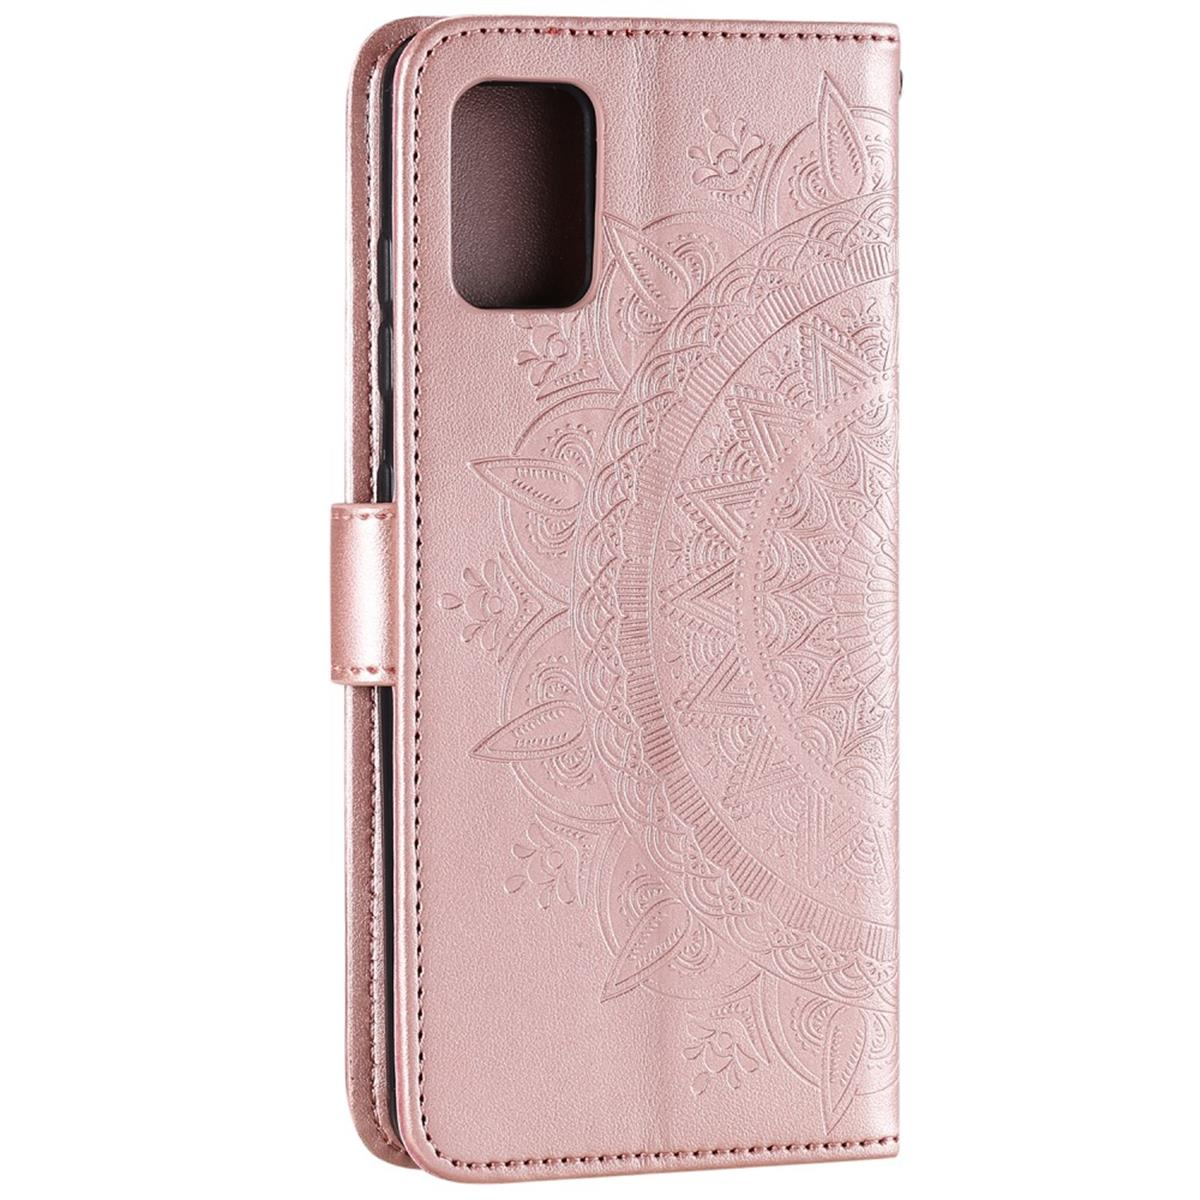 Roségold Muster, mit Galaxy COVERKINGZ Klapphülle Mandala Bookcover, Samsung, A51,